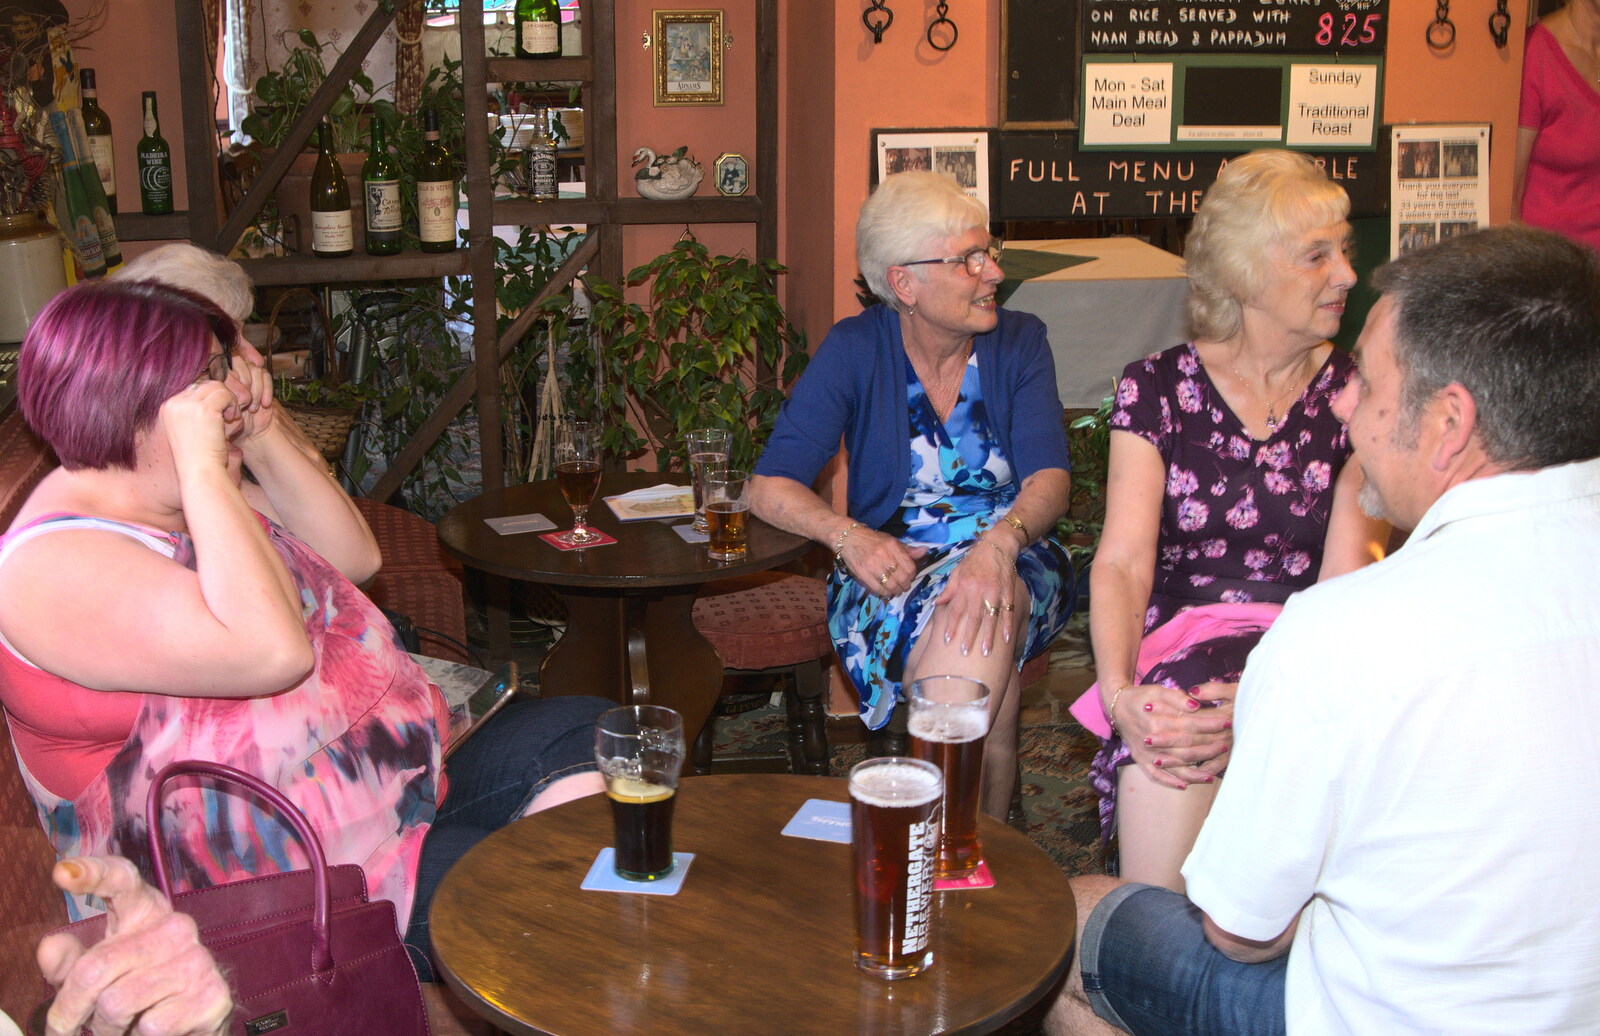 Spammy looks over from A Retirement: The Last Night of The Swan Inn, Brome, Suffolk - 3rd June 2017